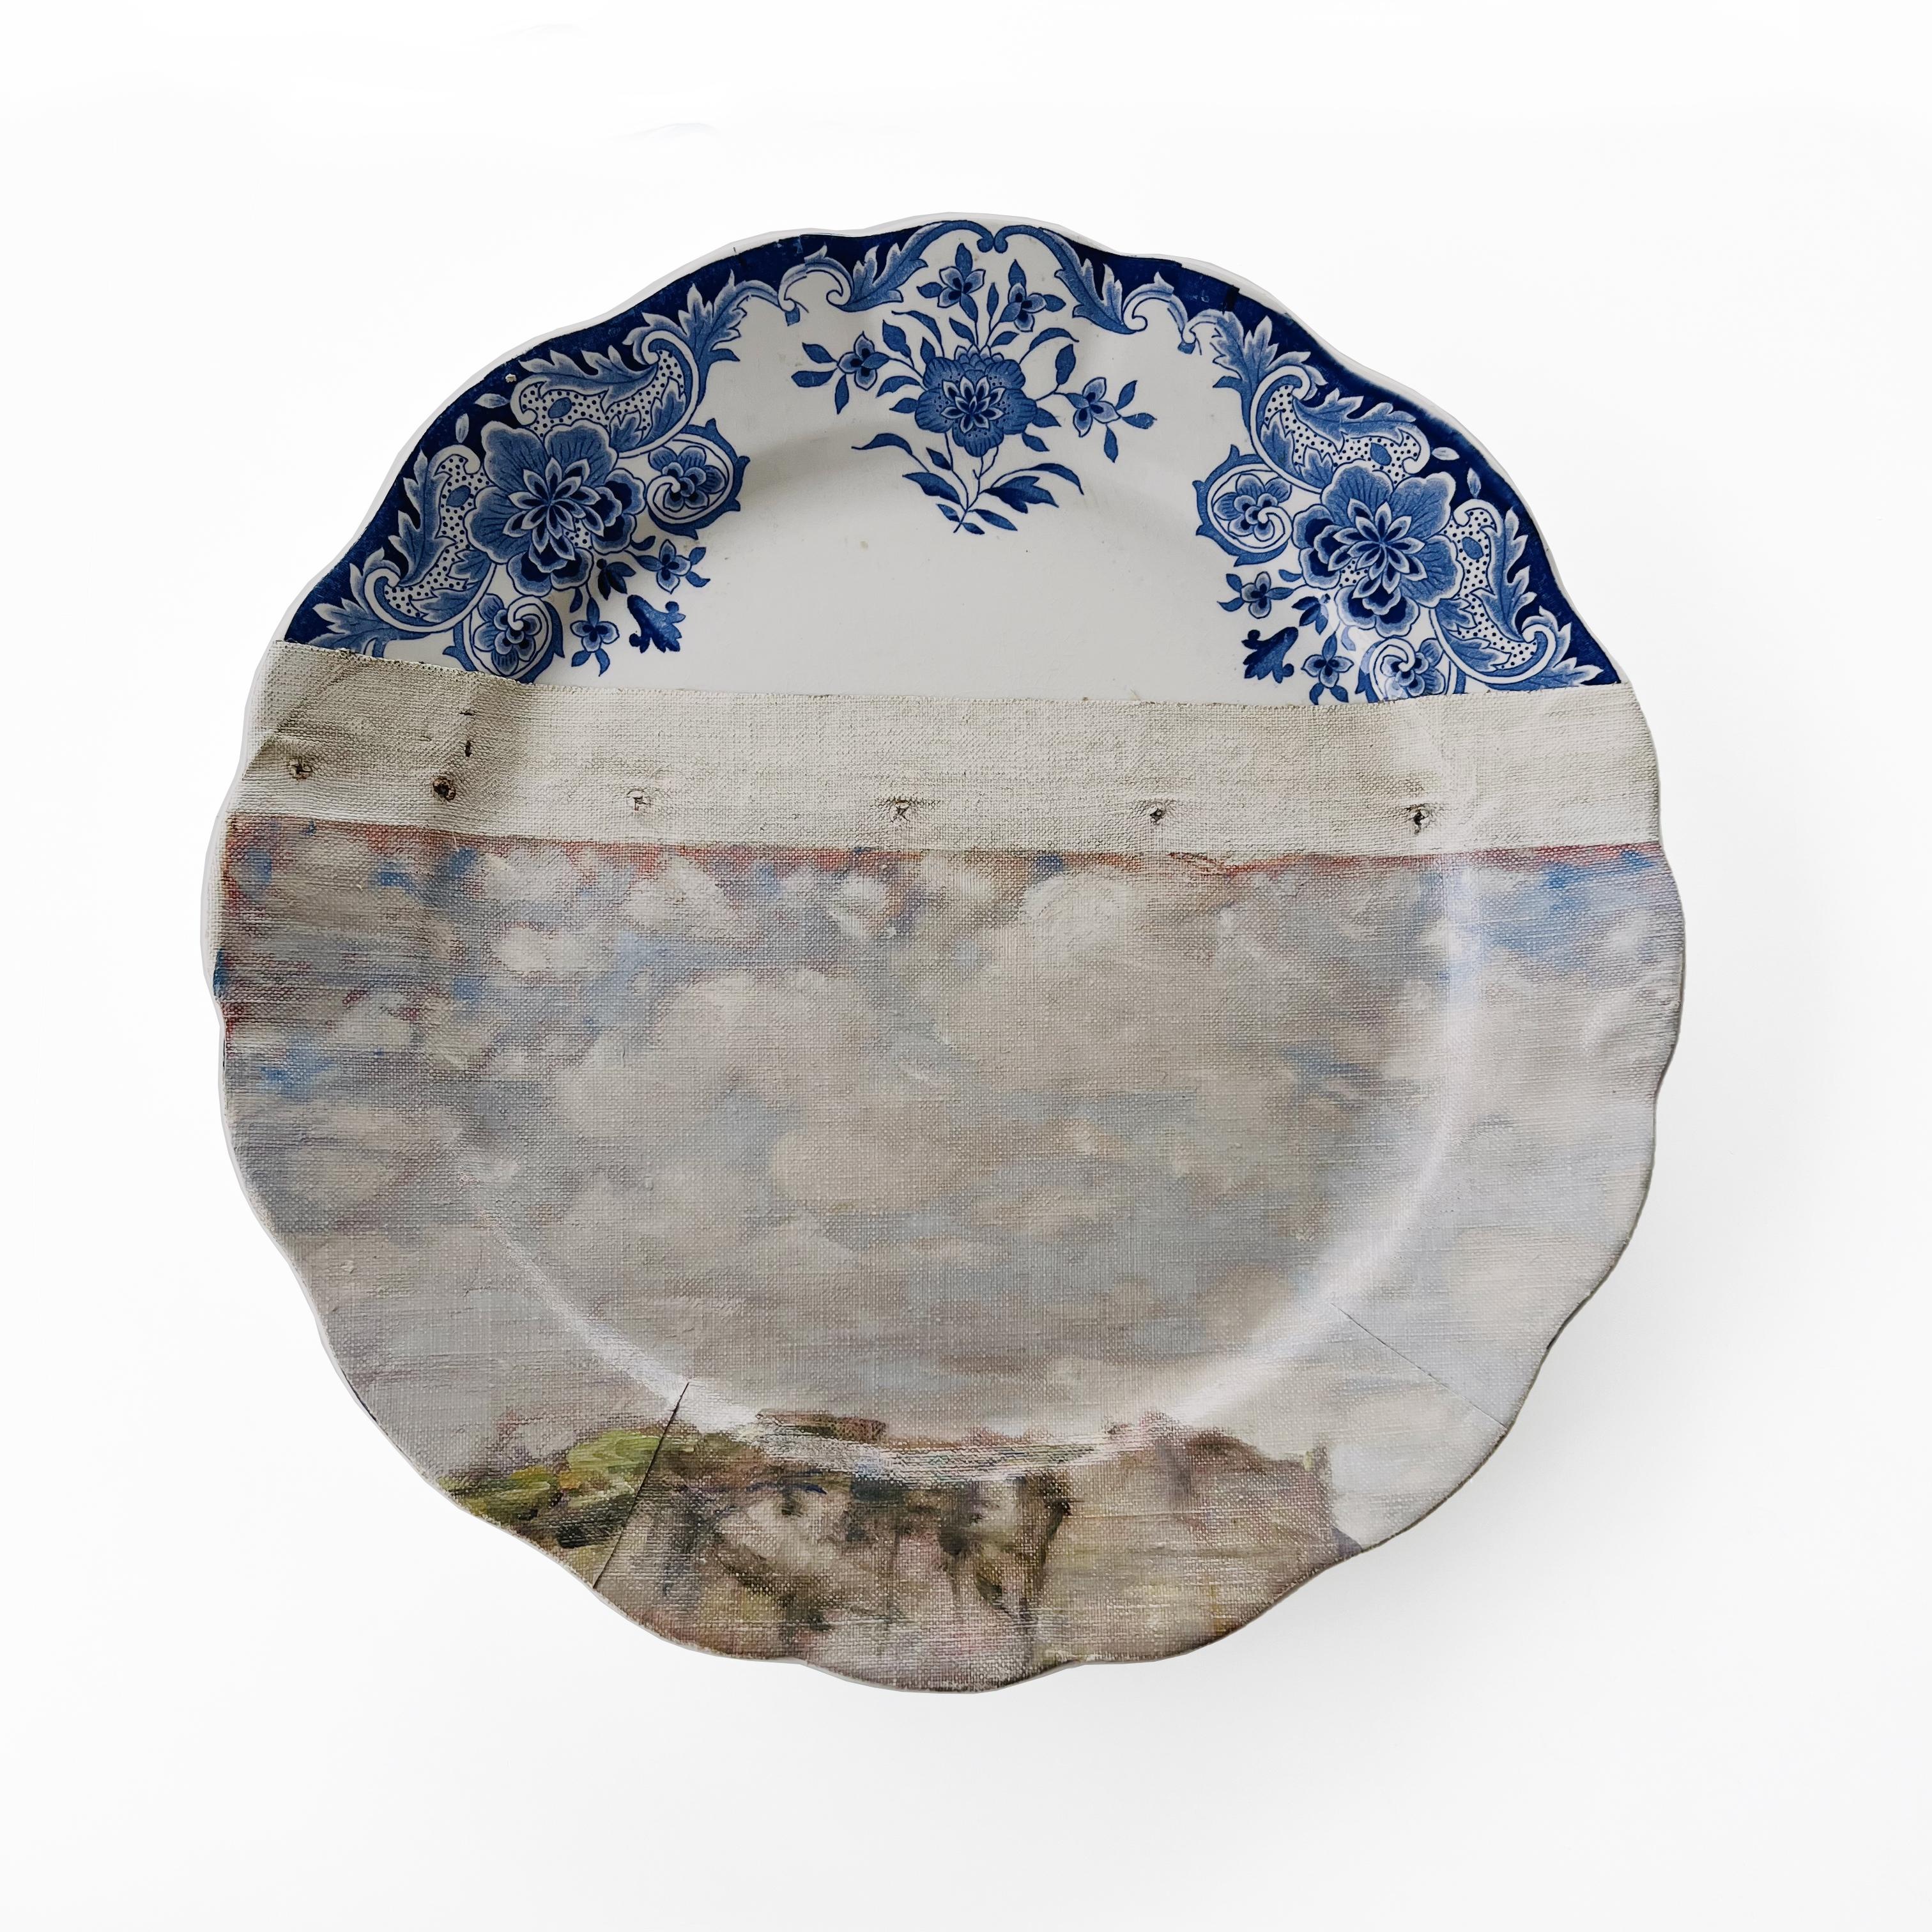 The Cliff of Étretat consists of 11 plates combined with two paintings of the famous Étretat cliffs off the coast of Normandy. They were often a subject of paintings by Claude Monet.

This one of a kind wall art composition of decorative plates and